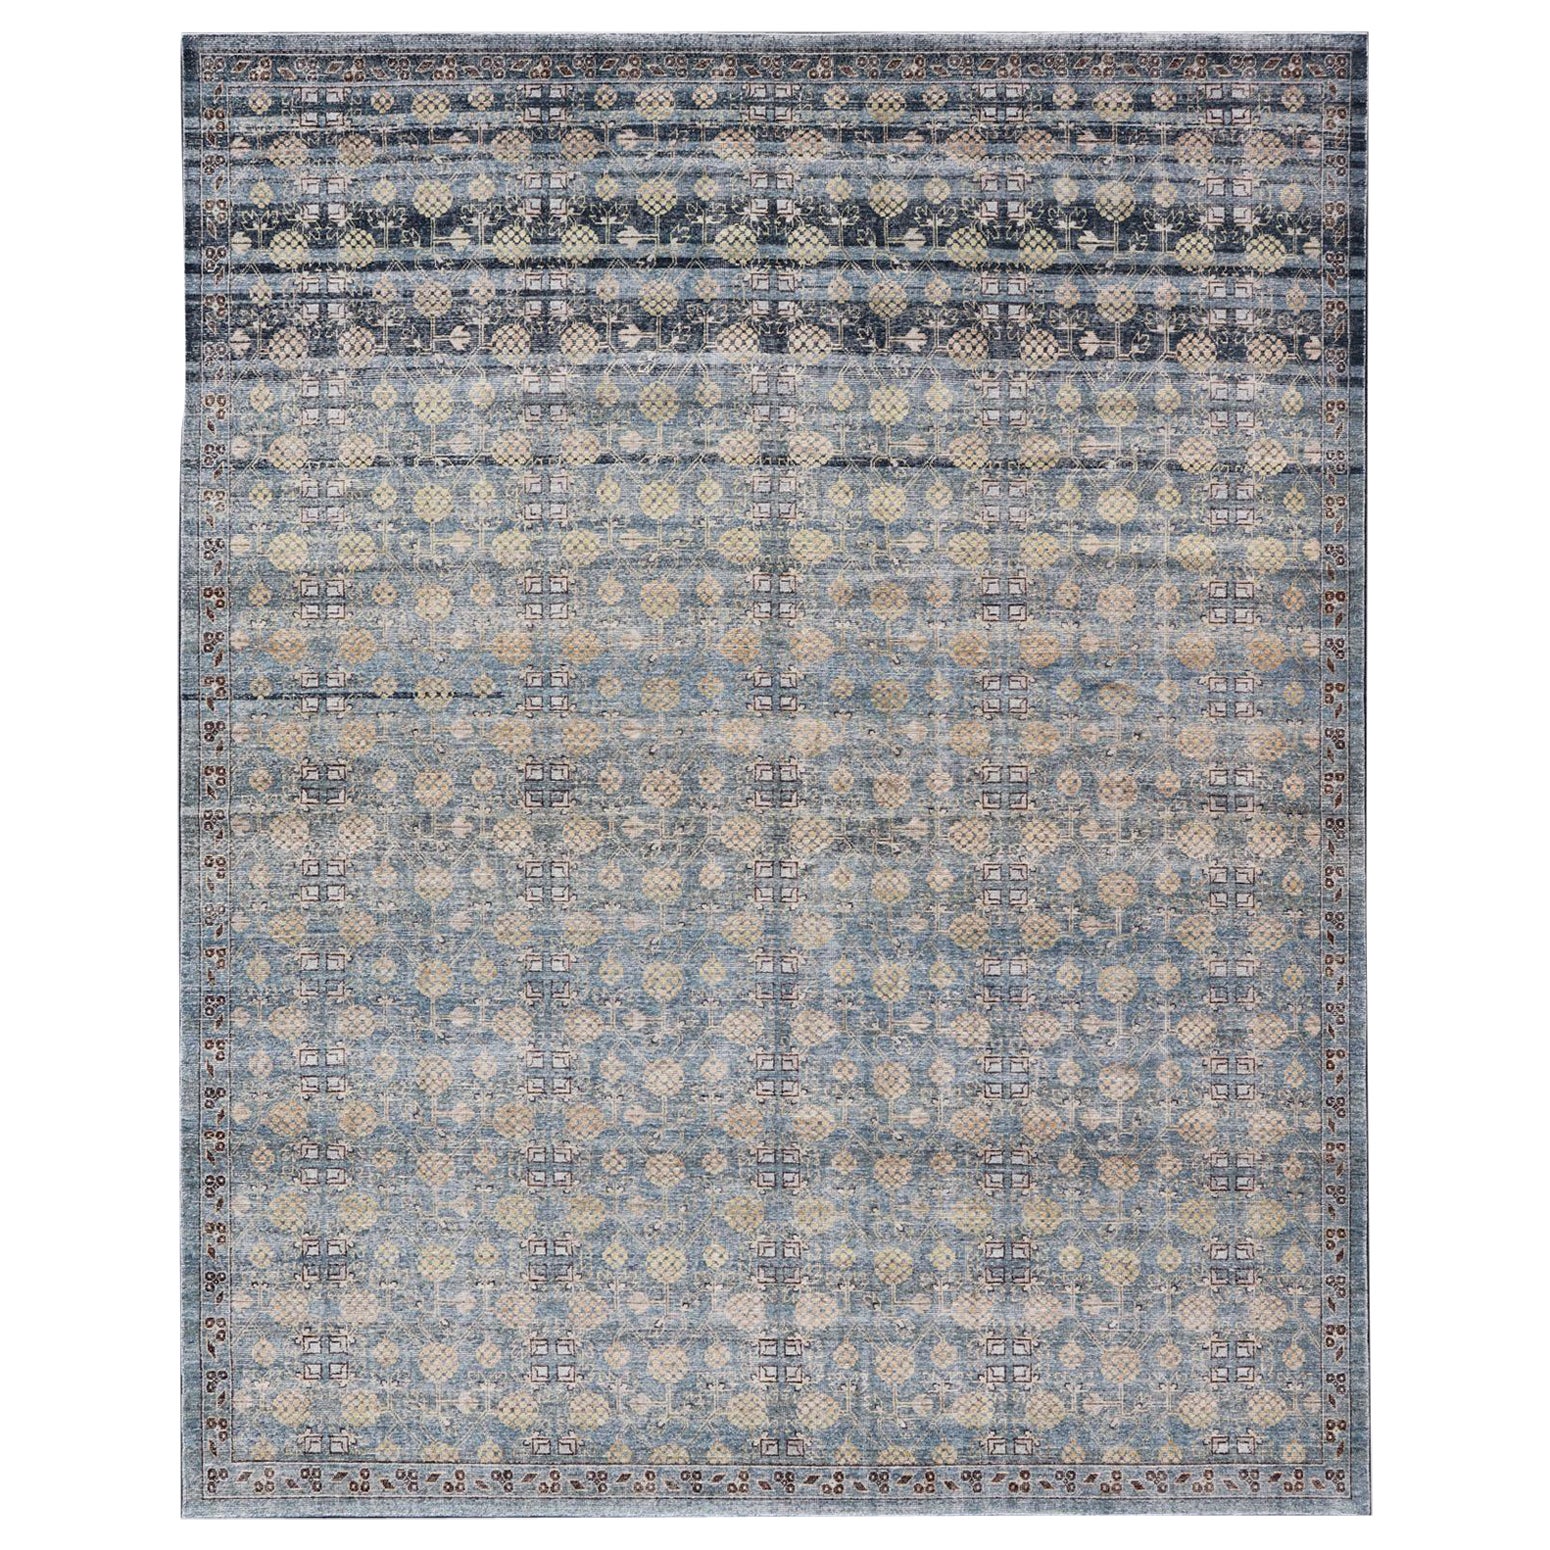 Modern All-Over Tribal Motif Khotan Area Rug in Dark Blues, Brown and Cream